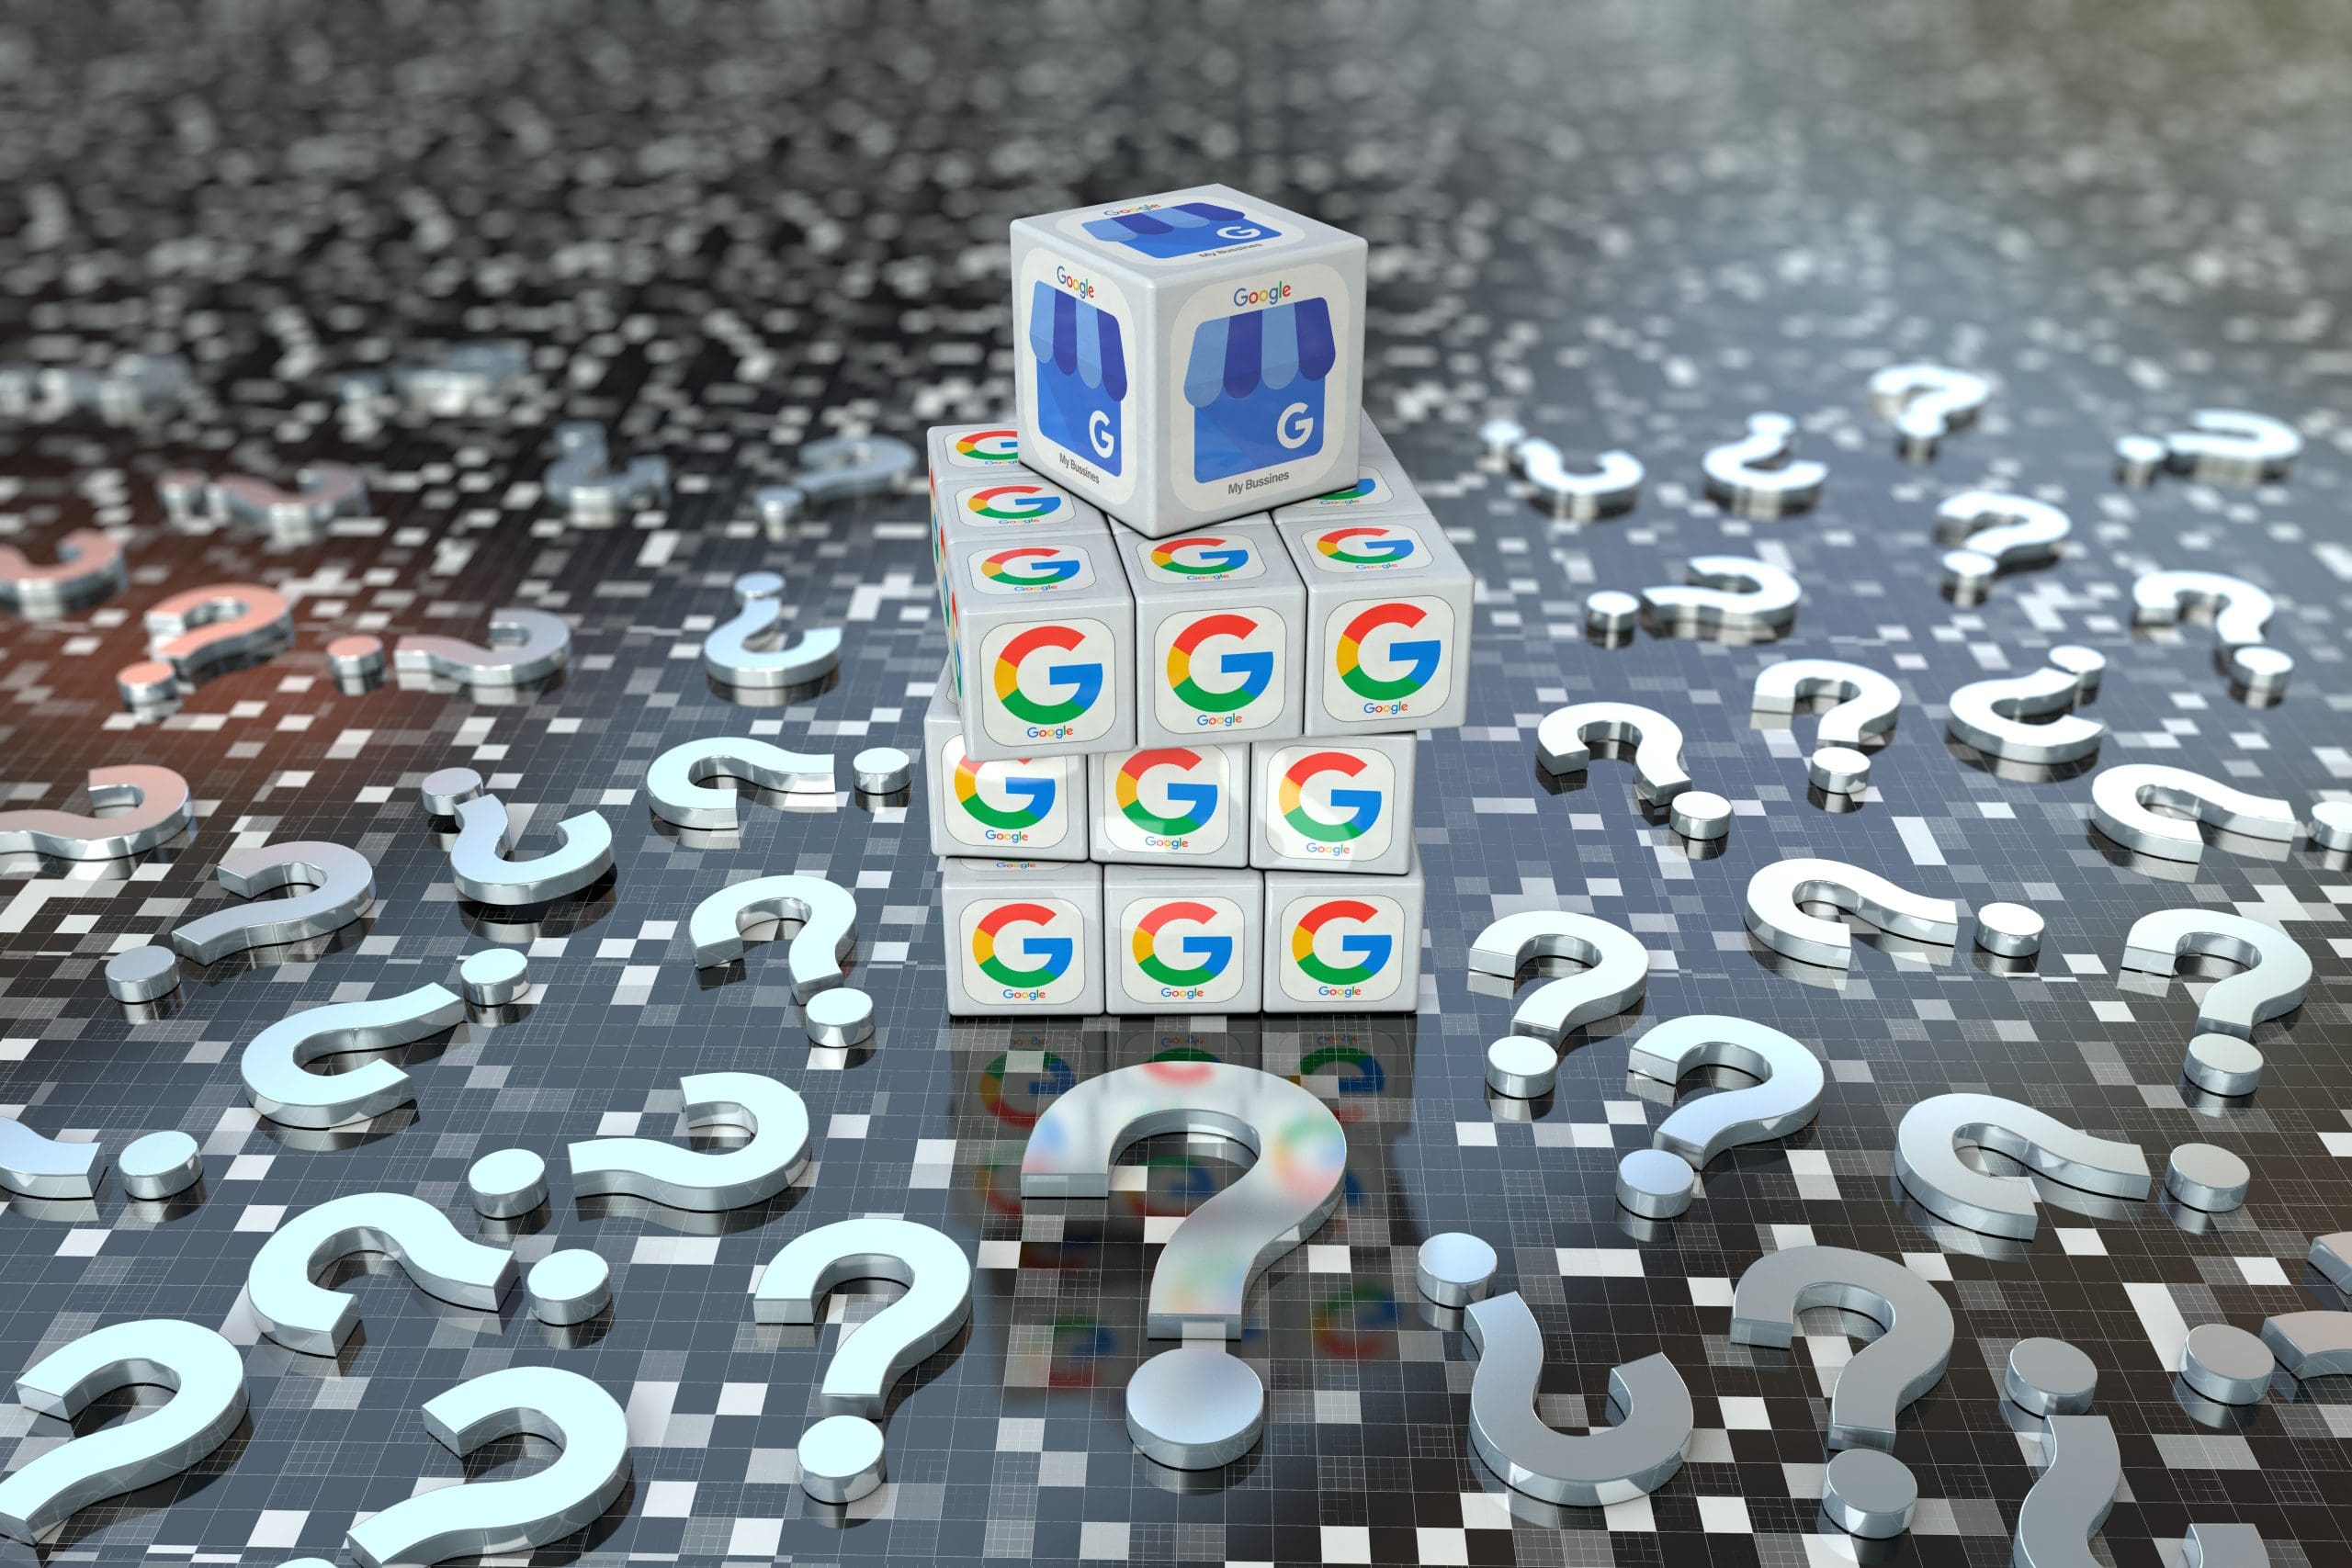 3d illustration of a stack of cubes with the google logo on a reflective surface surrounded by numerous white question marks.